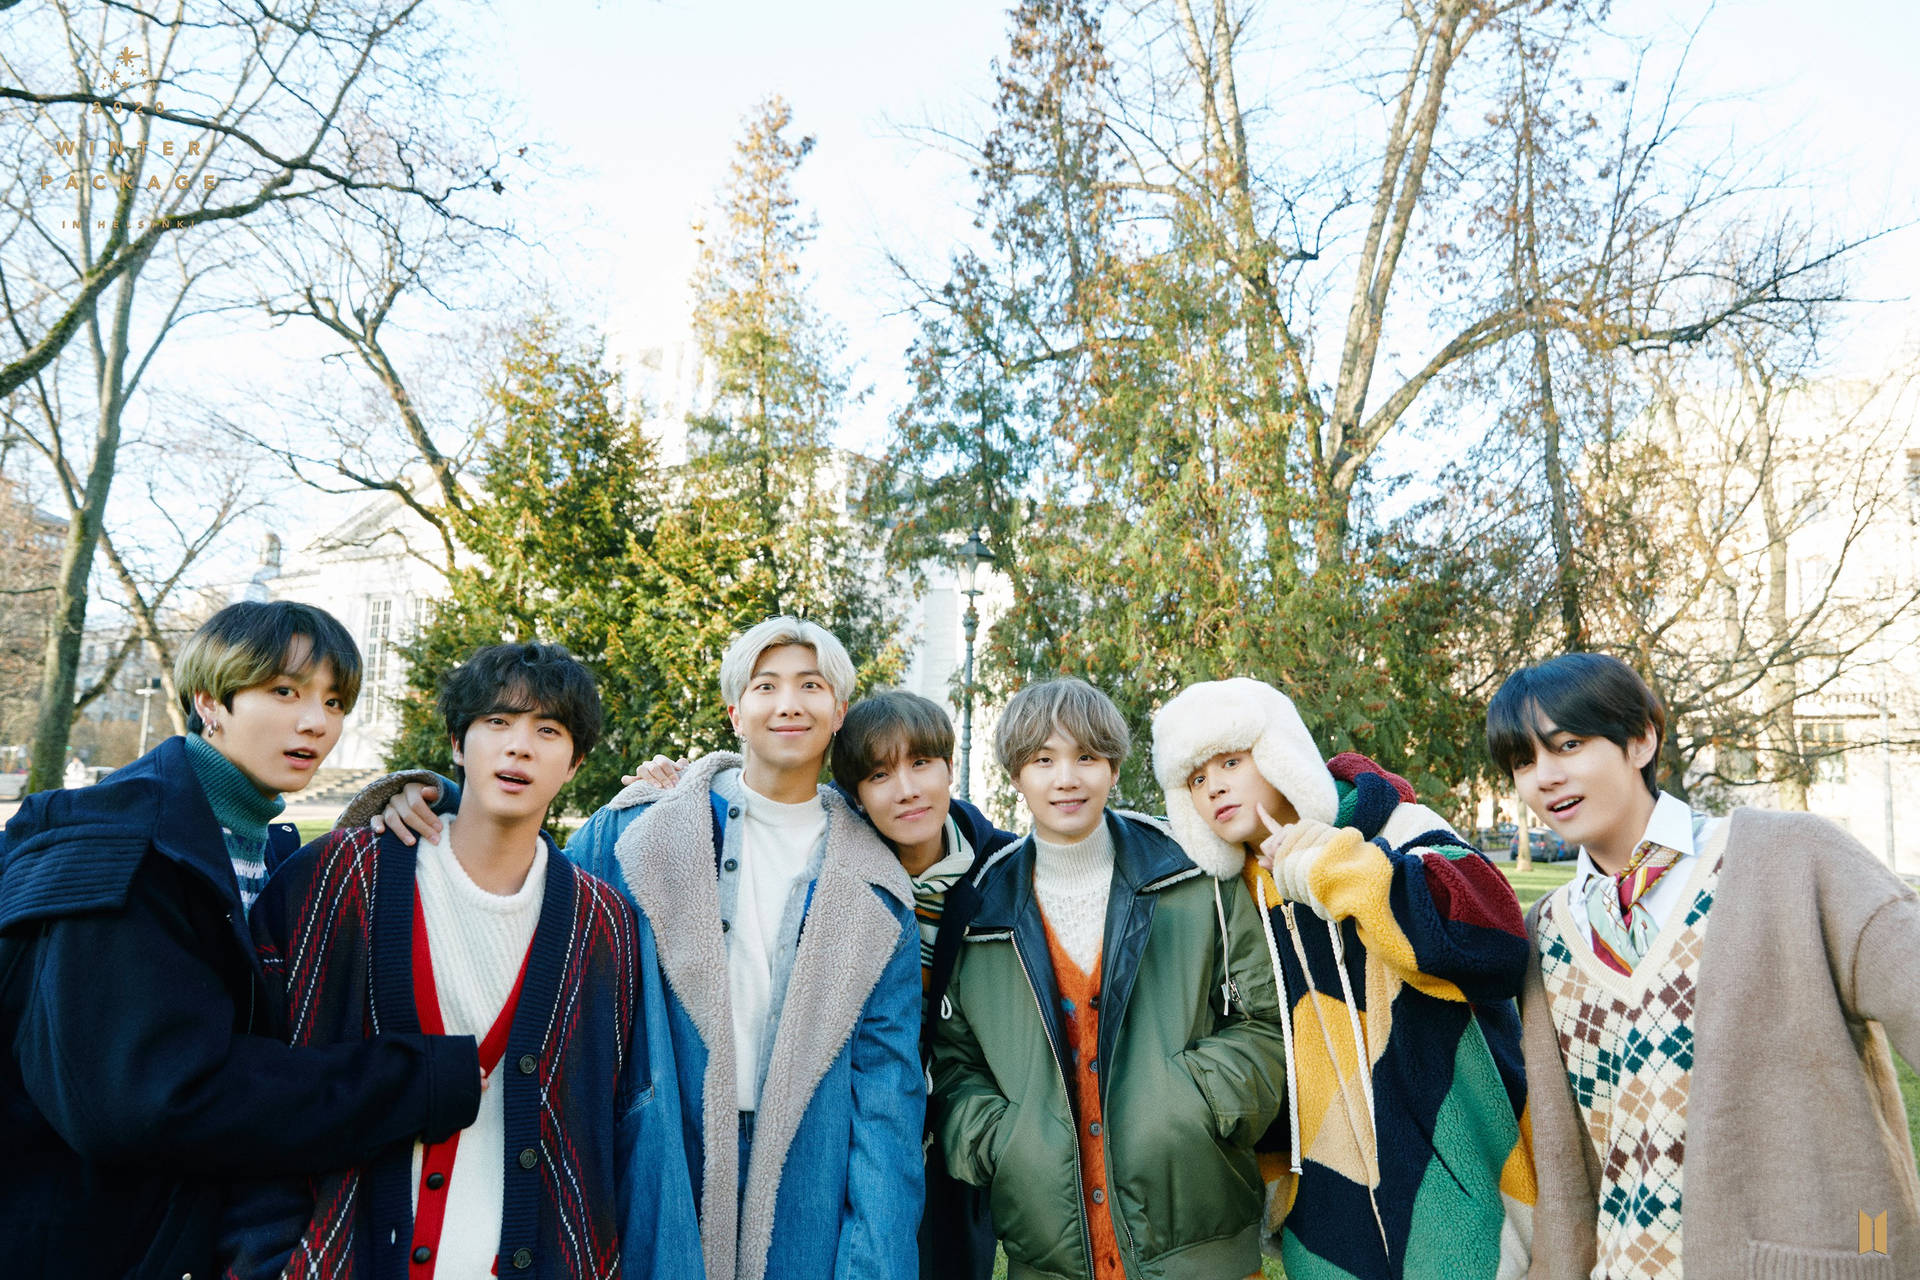 Bts 2021 In Winter Clothes Wallpaper